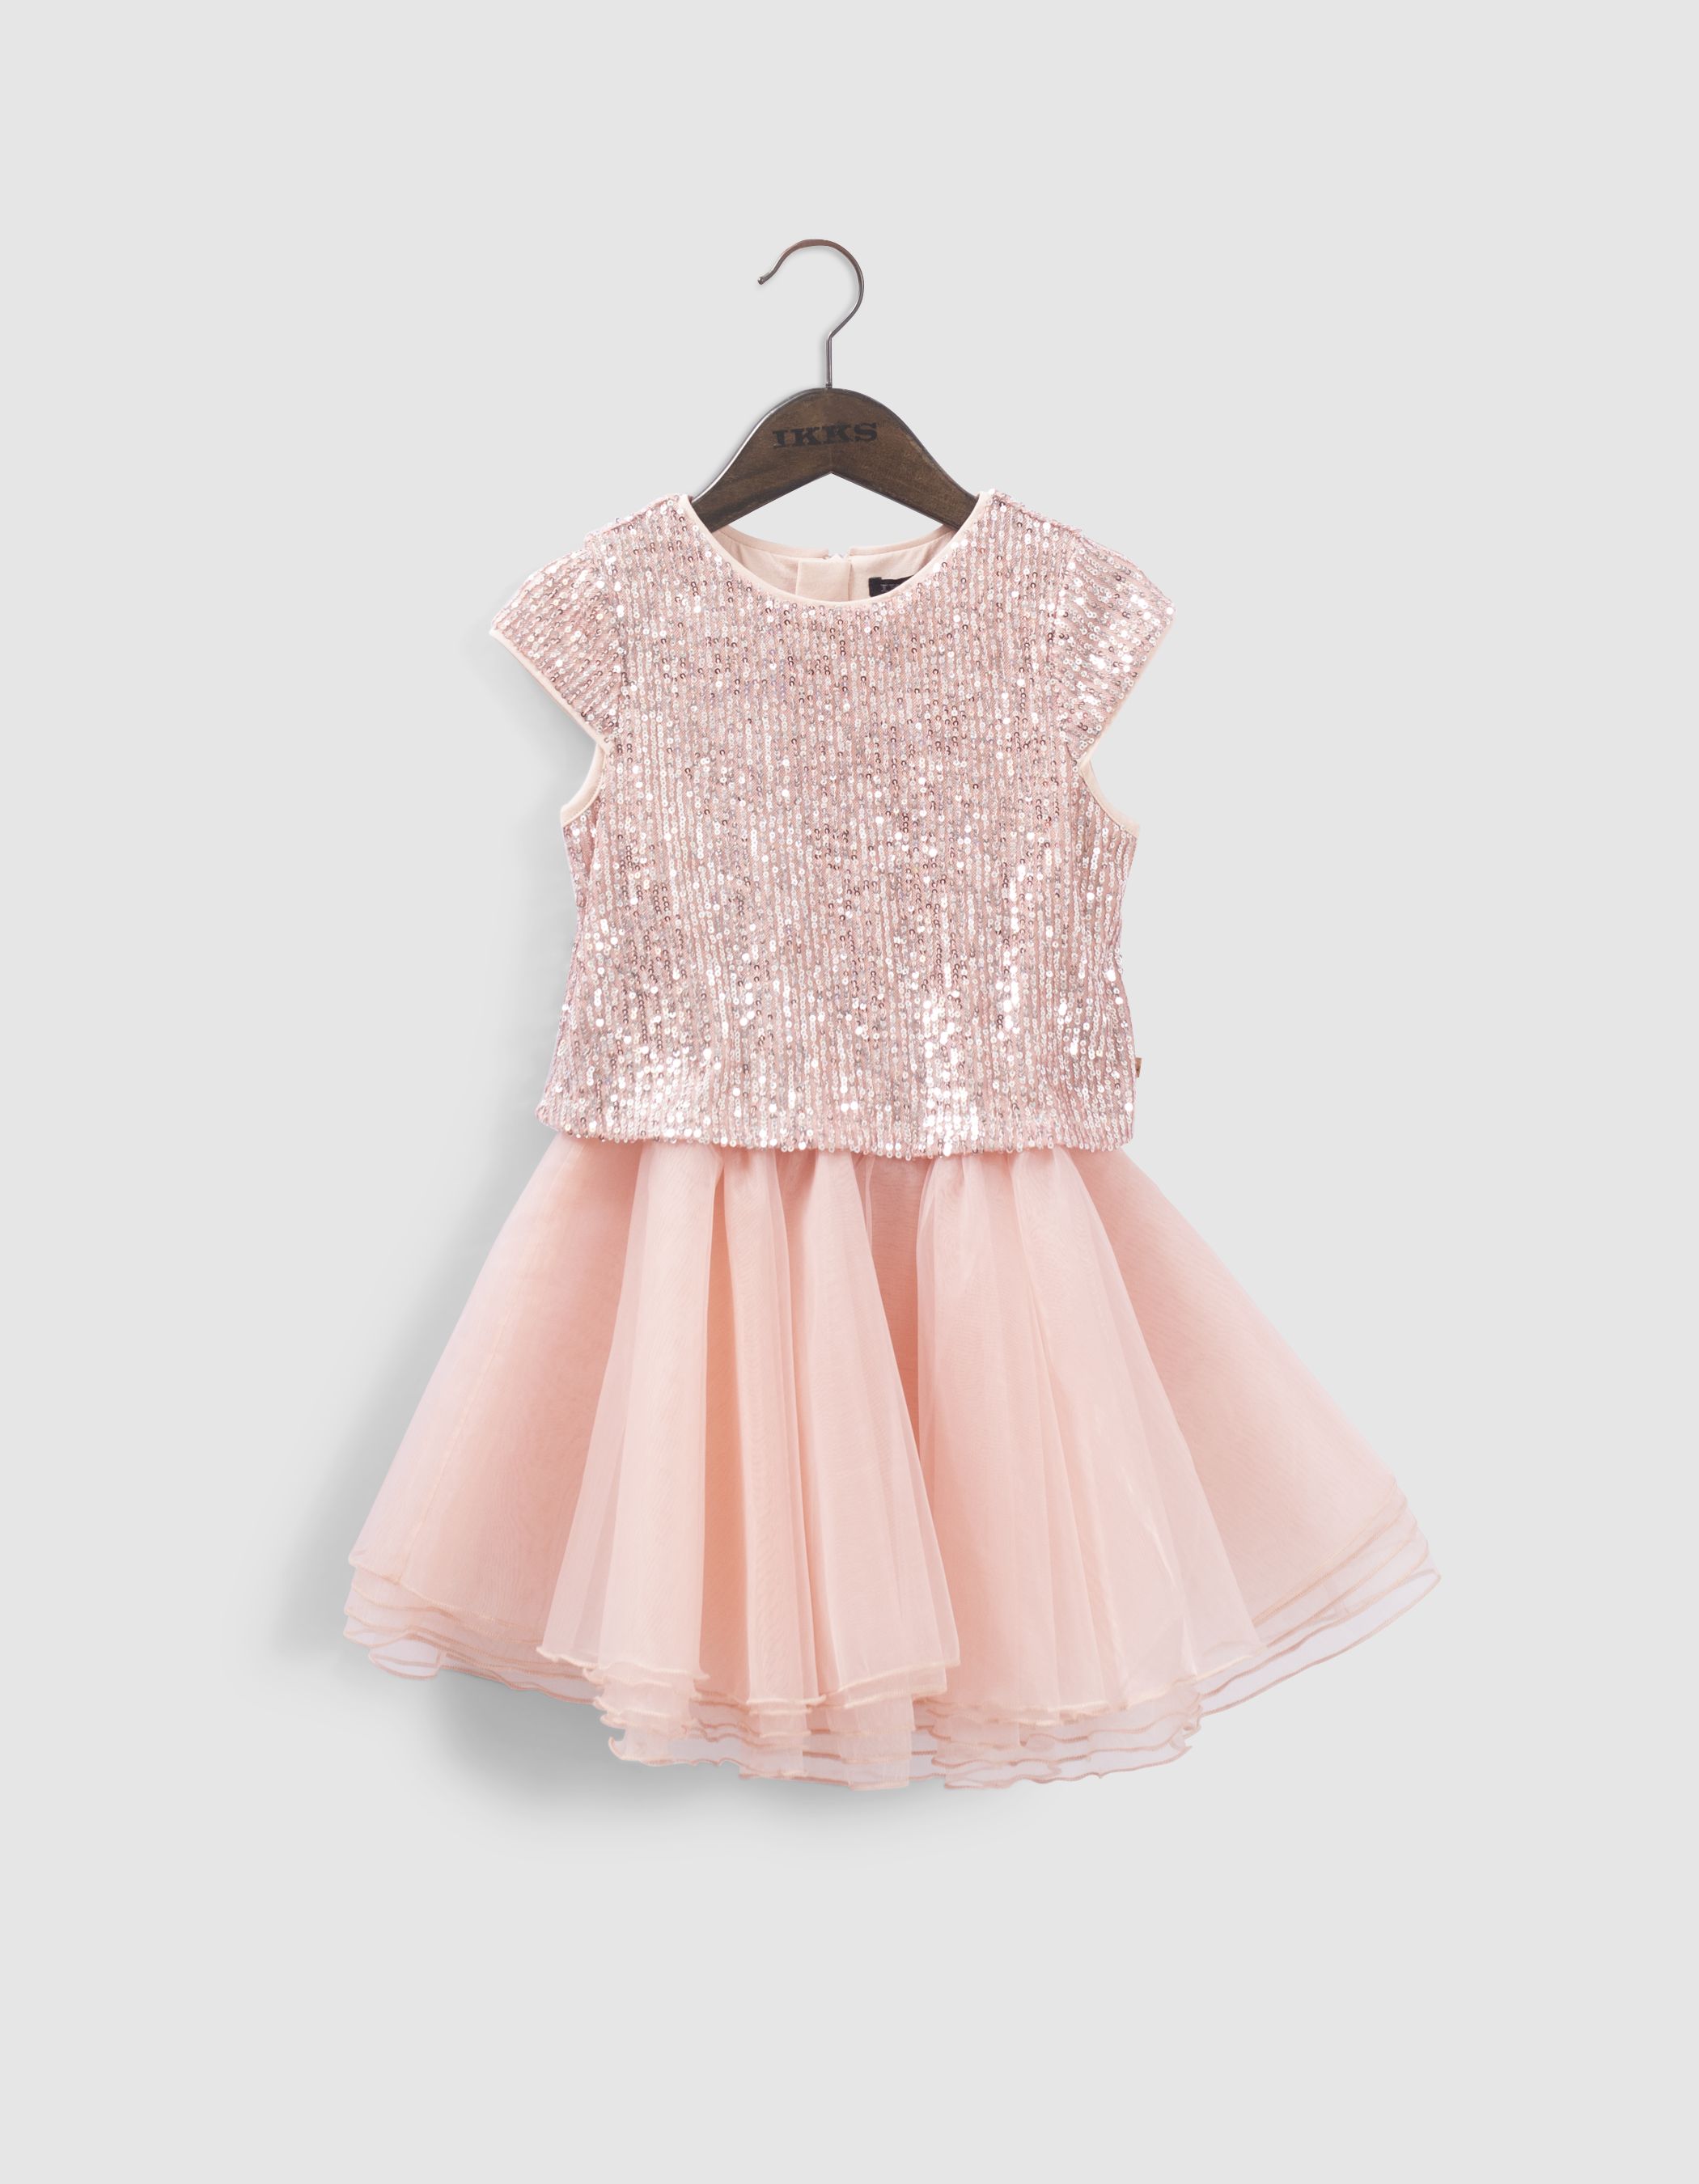 Girls' dress with sequin top